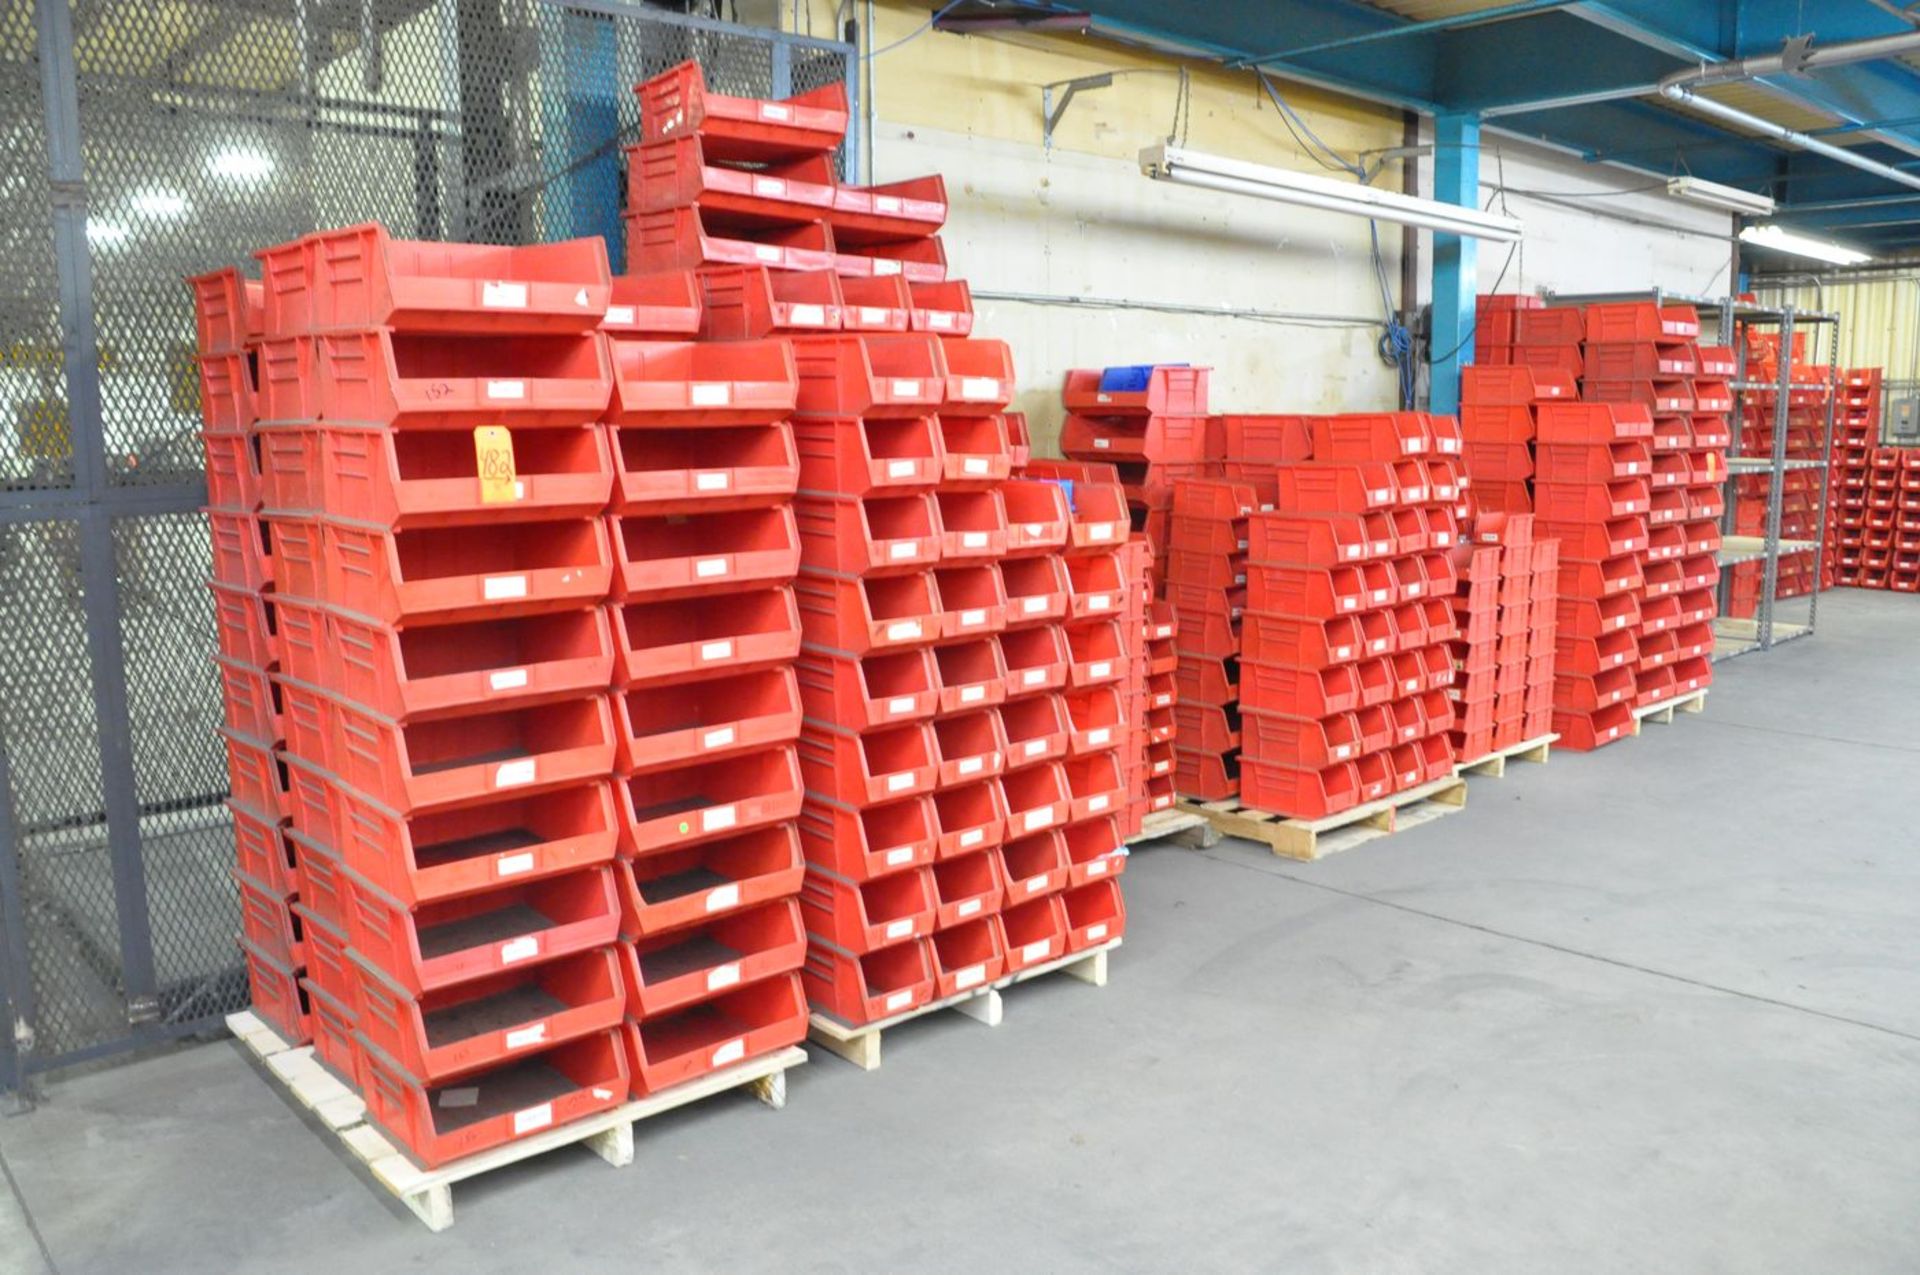 Lot - Akro and Uline Brand Stackable and Hangable Plastic Parts Bins on (6) Pallets, to Include: 4- - Image 2 of 2